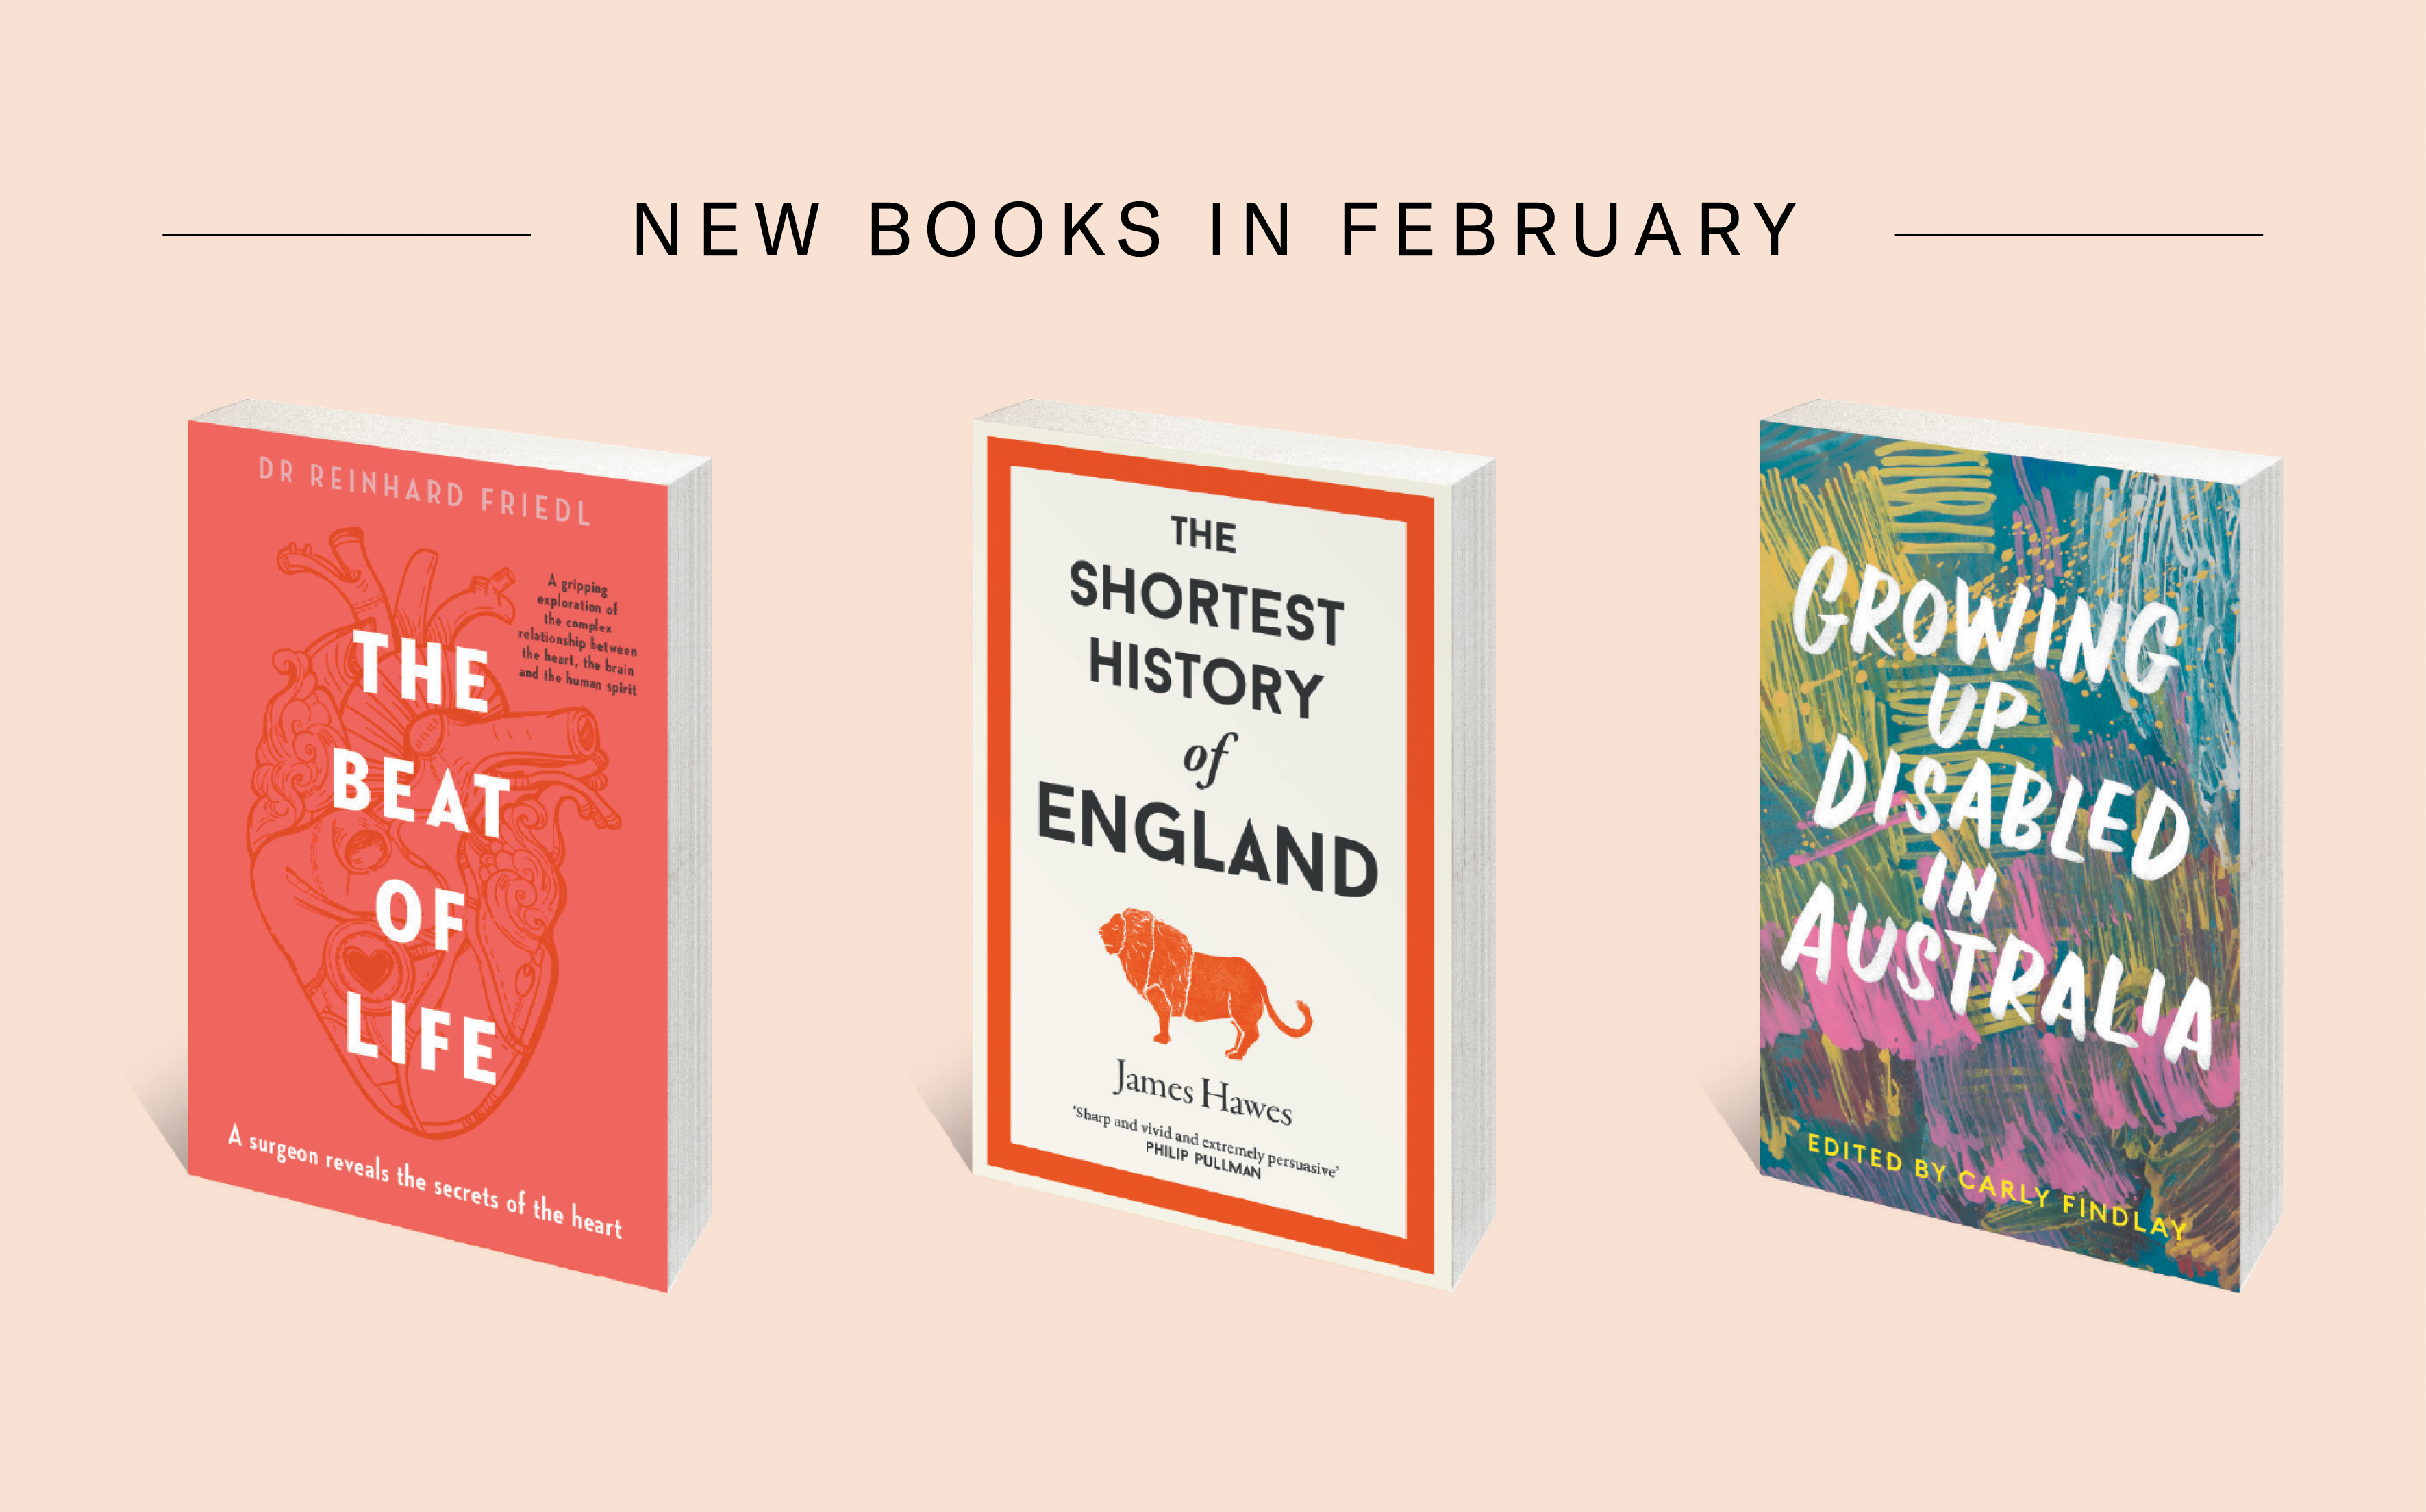 New books in February: The Beat of Life, The Shortest History of England and Growing Up Disabled in Australia